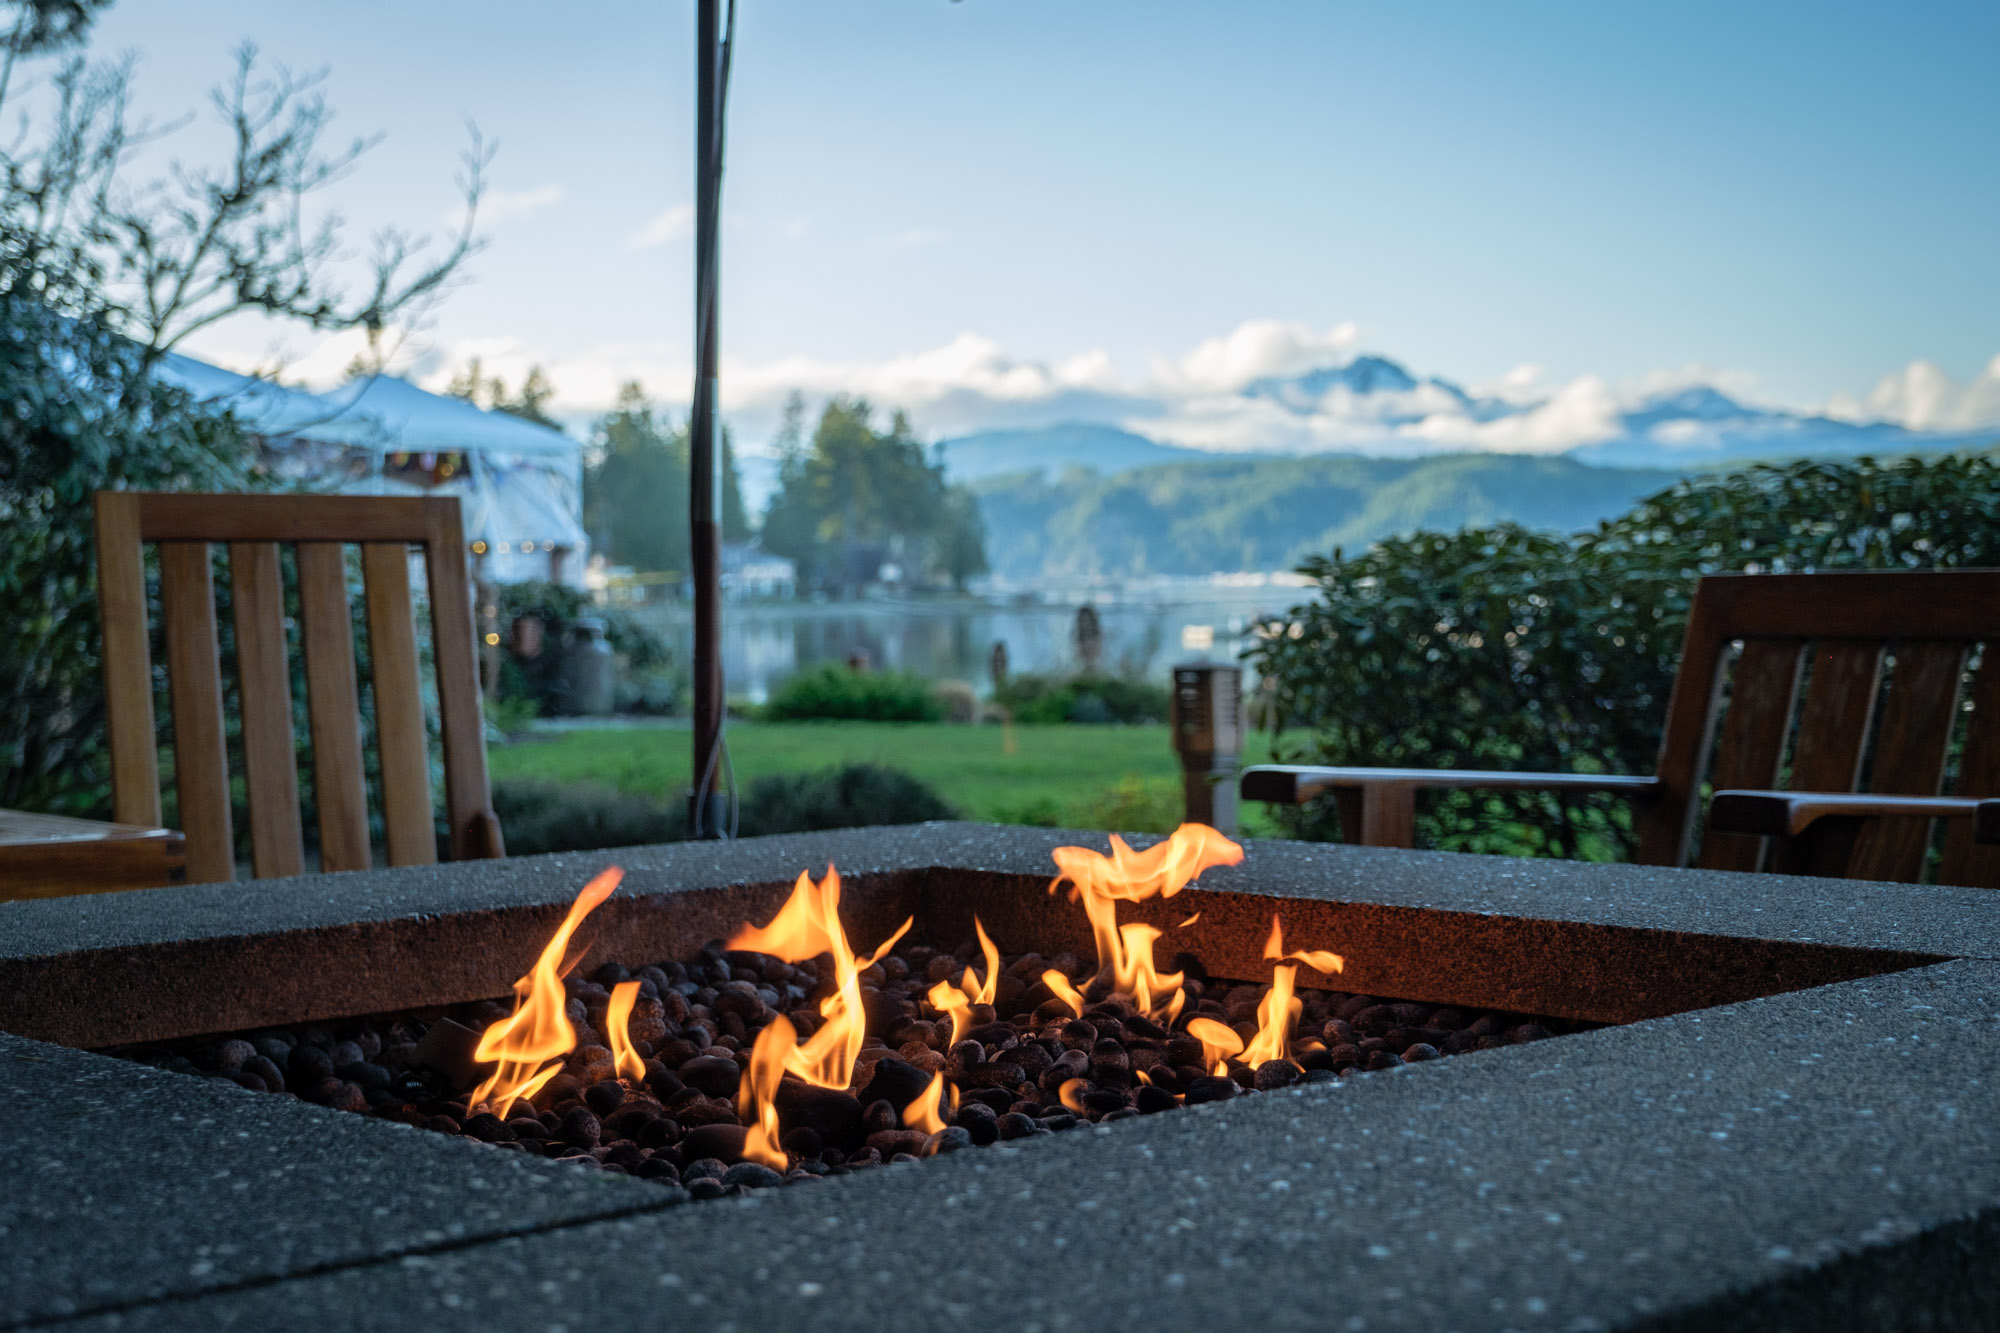 A fire pit burning in front of a view of the Olympic Mountain range in Washington state